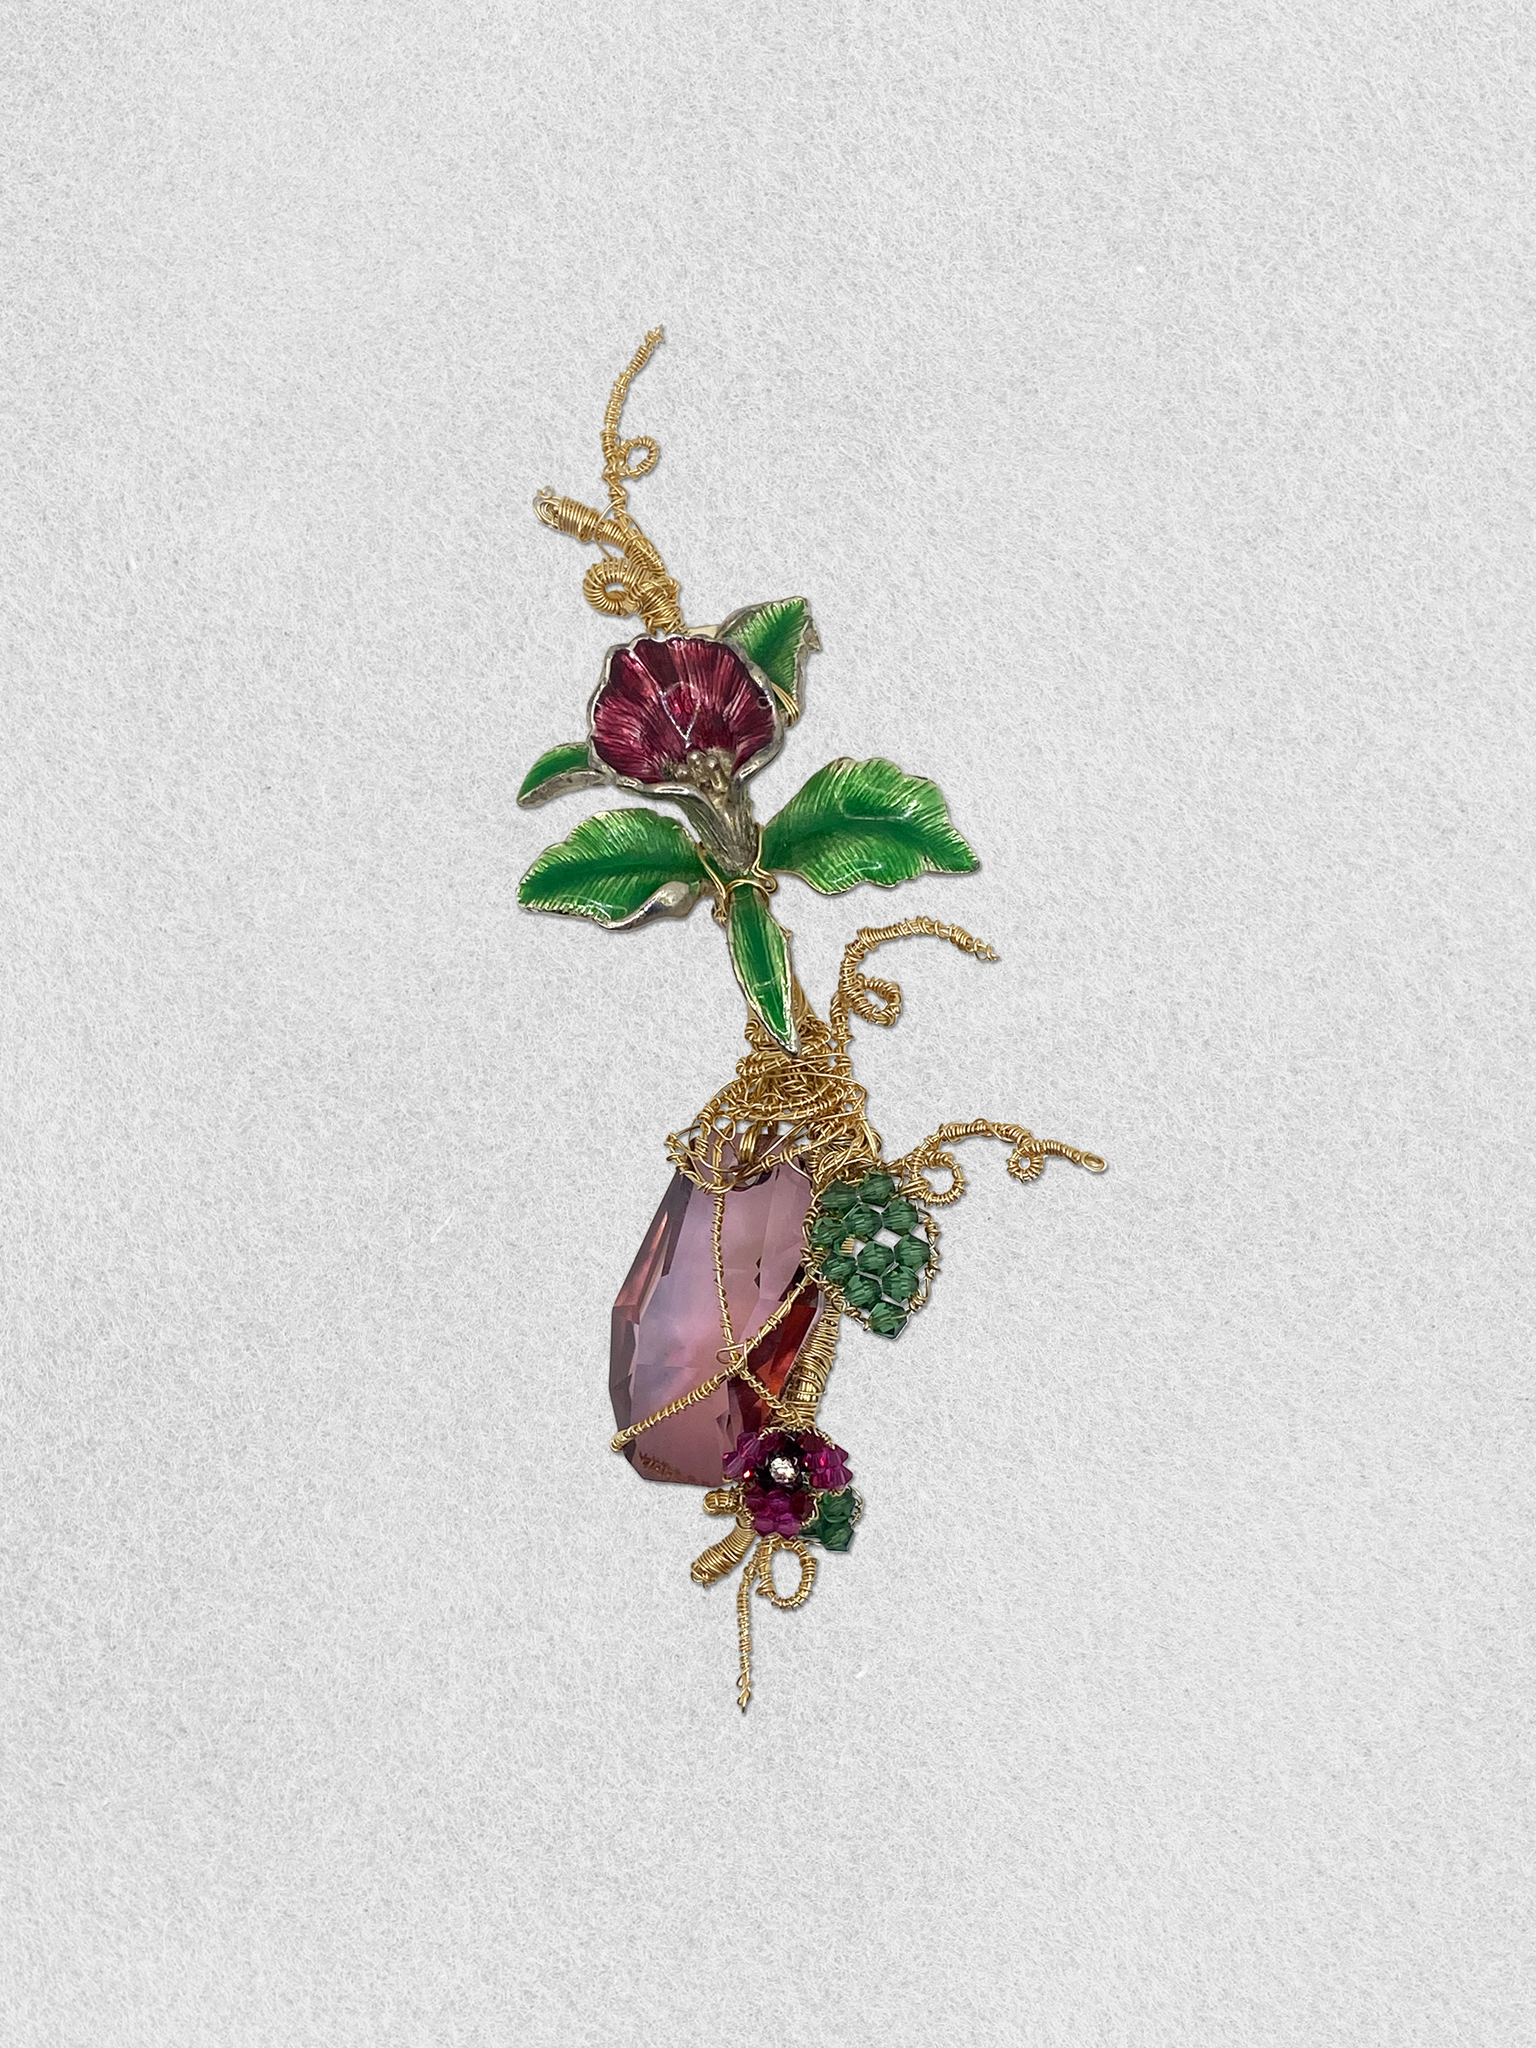 Men's Lapel Pin - Wild Orchid of the Forest